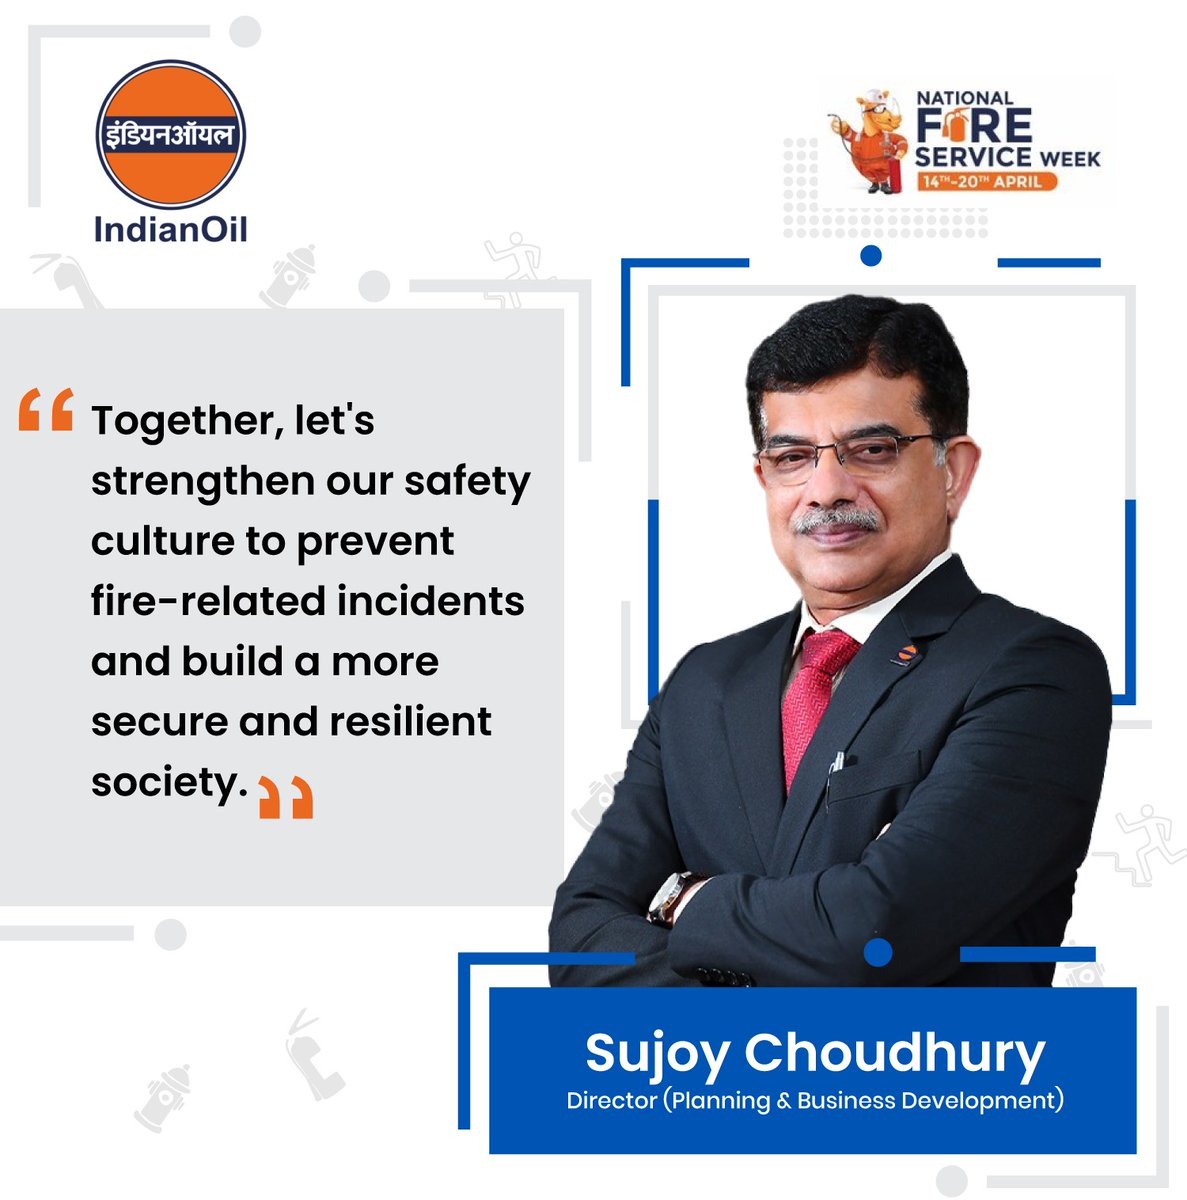 During #NationalFireServiceWeek, IndianOil reiterates its commitment to cultivating a robust #safety culture that permeates every aspect of our operations. Through use of #technology, continuous #vigilance, awareness and proactive measures, we strive to mitigate fire risks and…